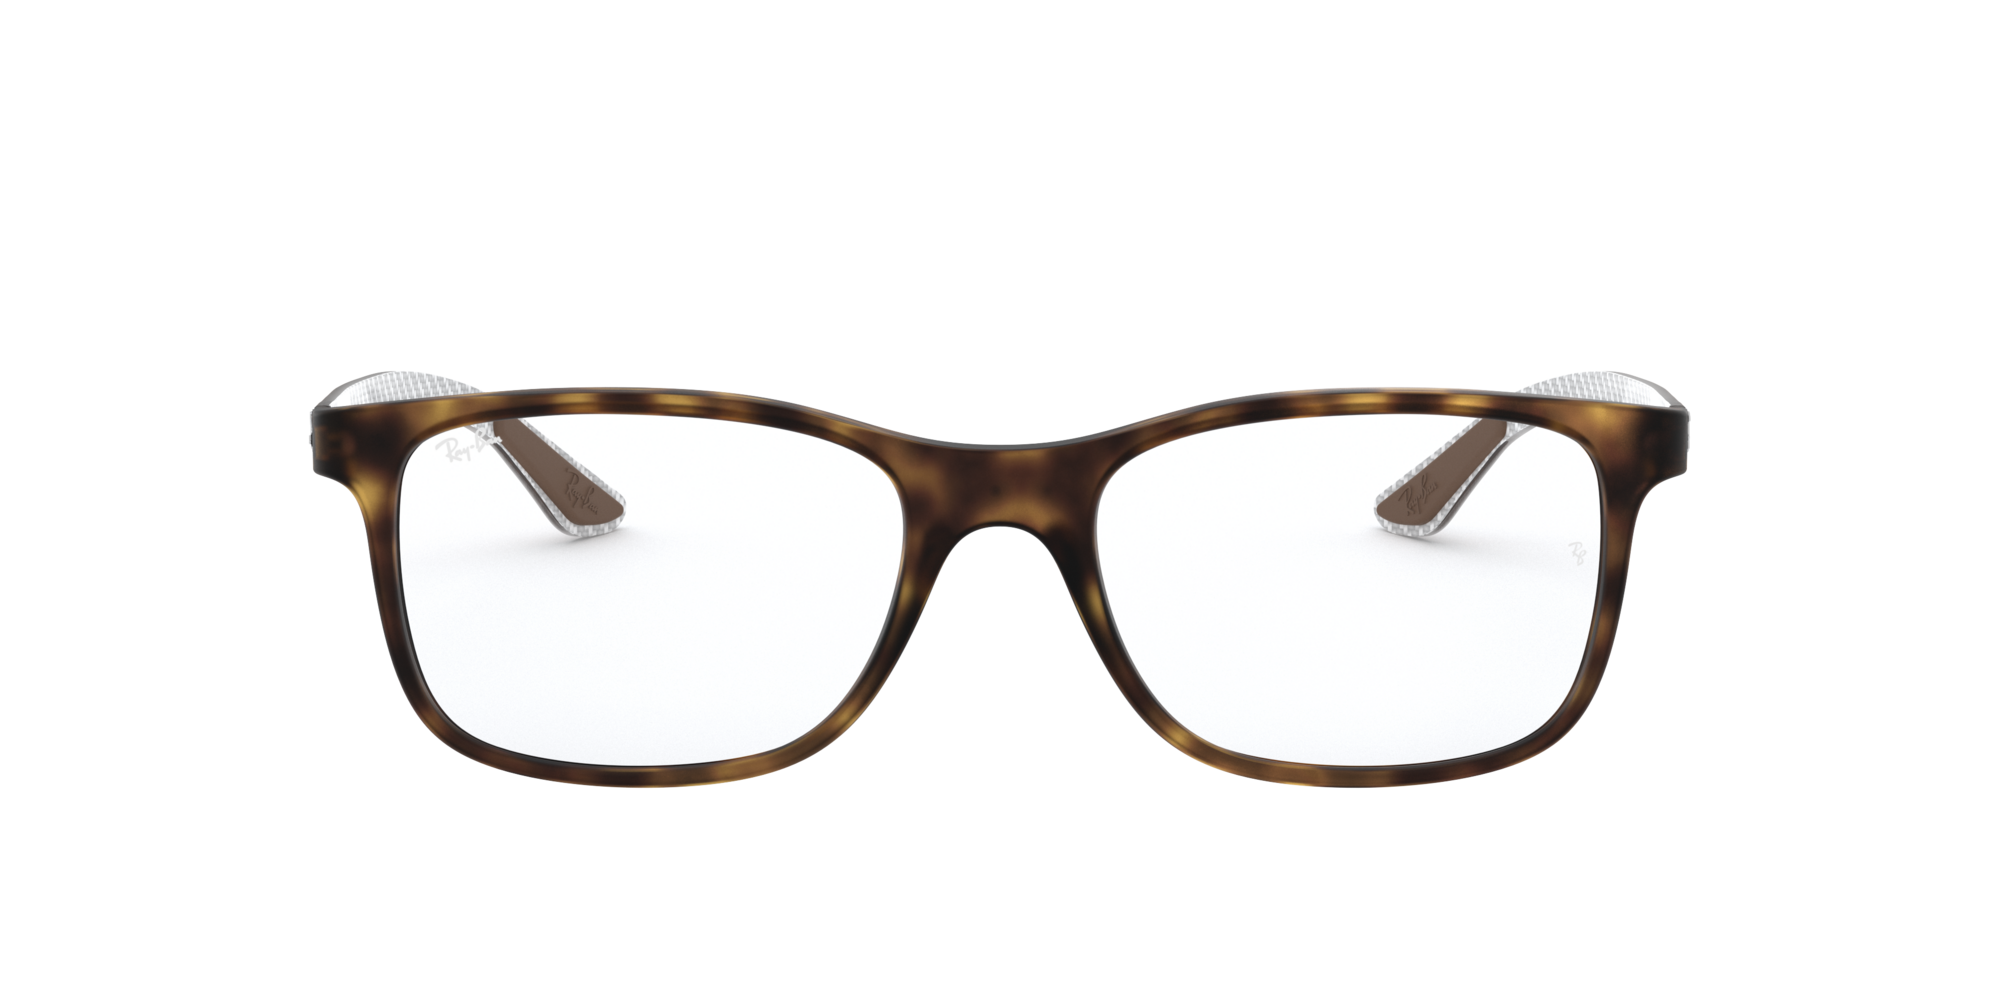 Ray-Ban 0RX8903 Glasses in Tortoise 